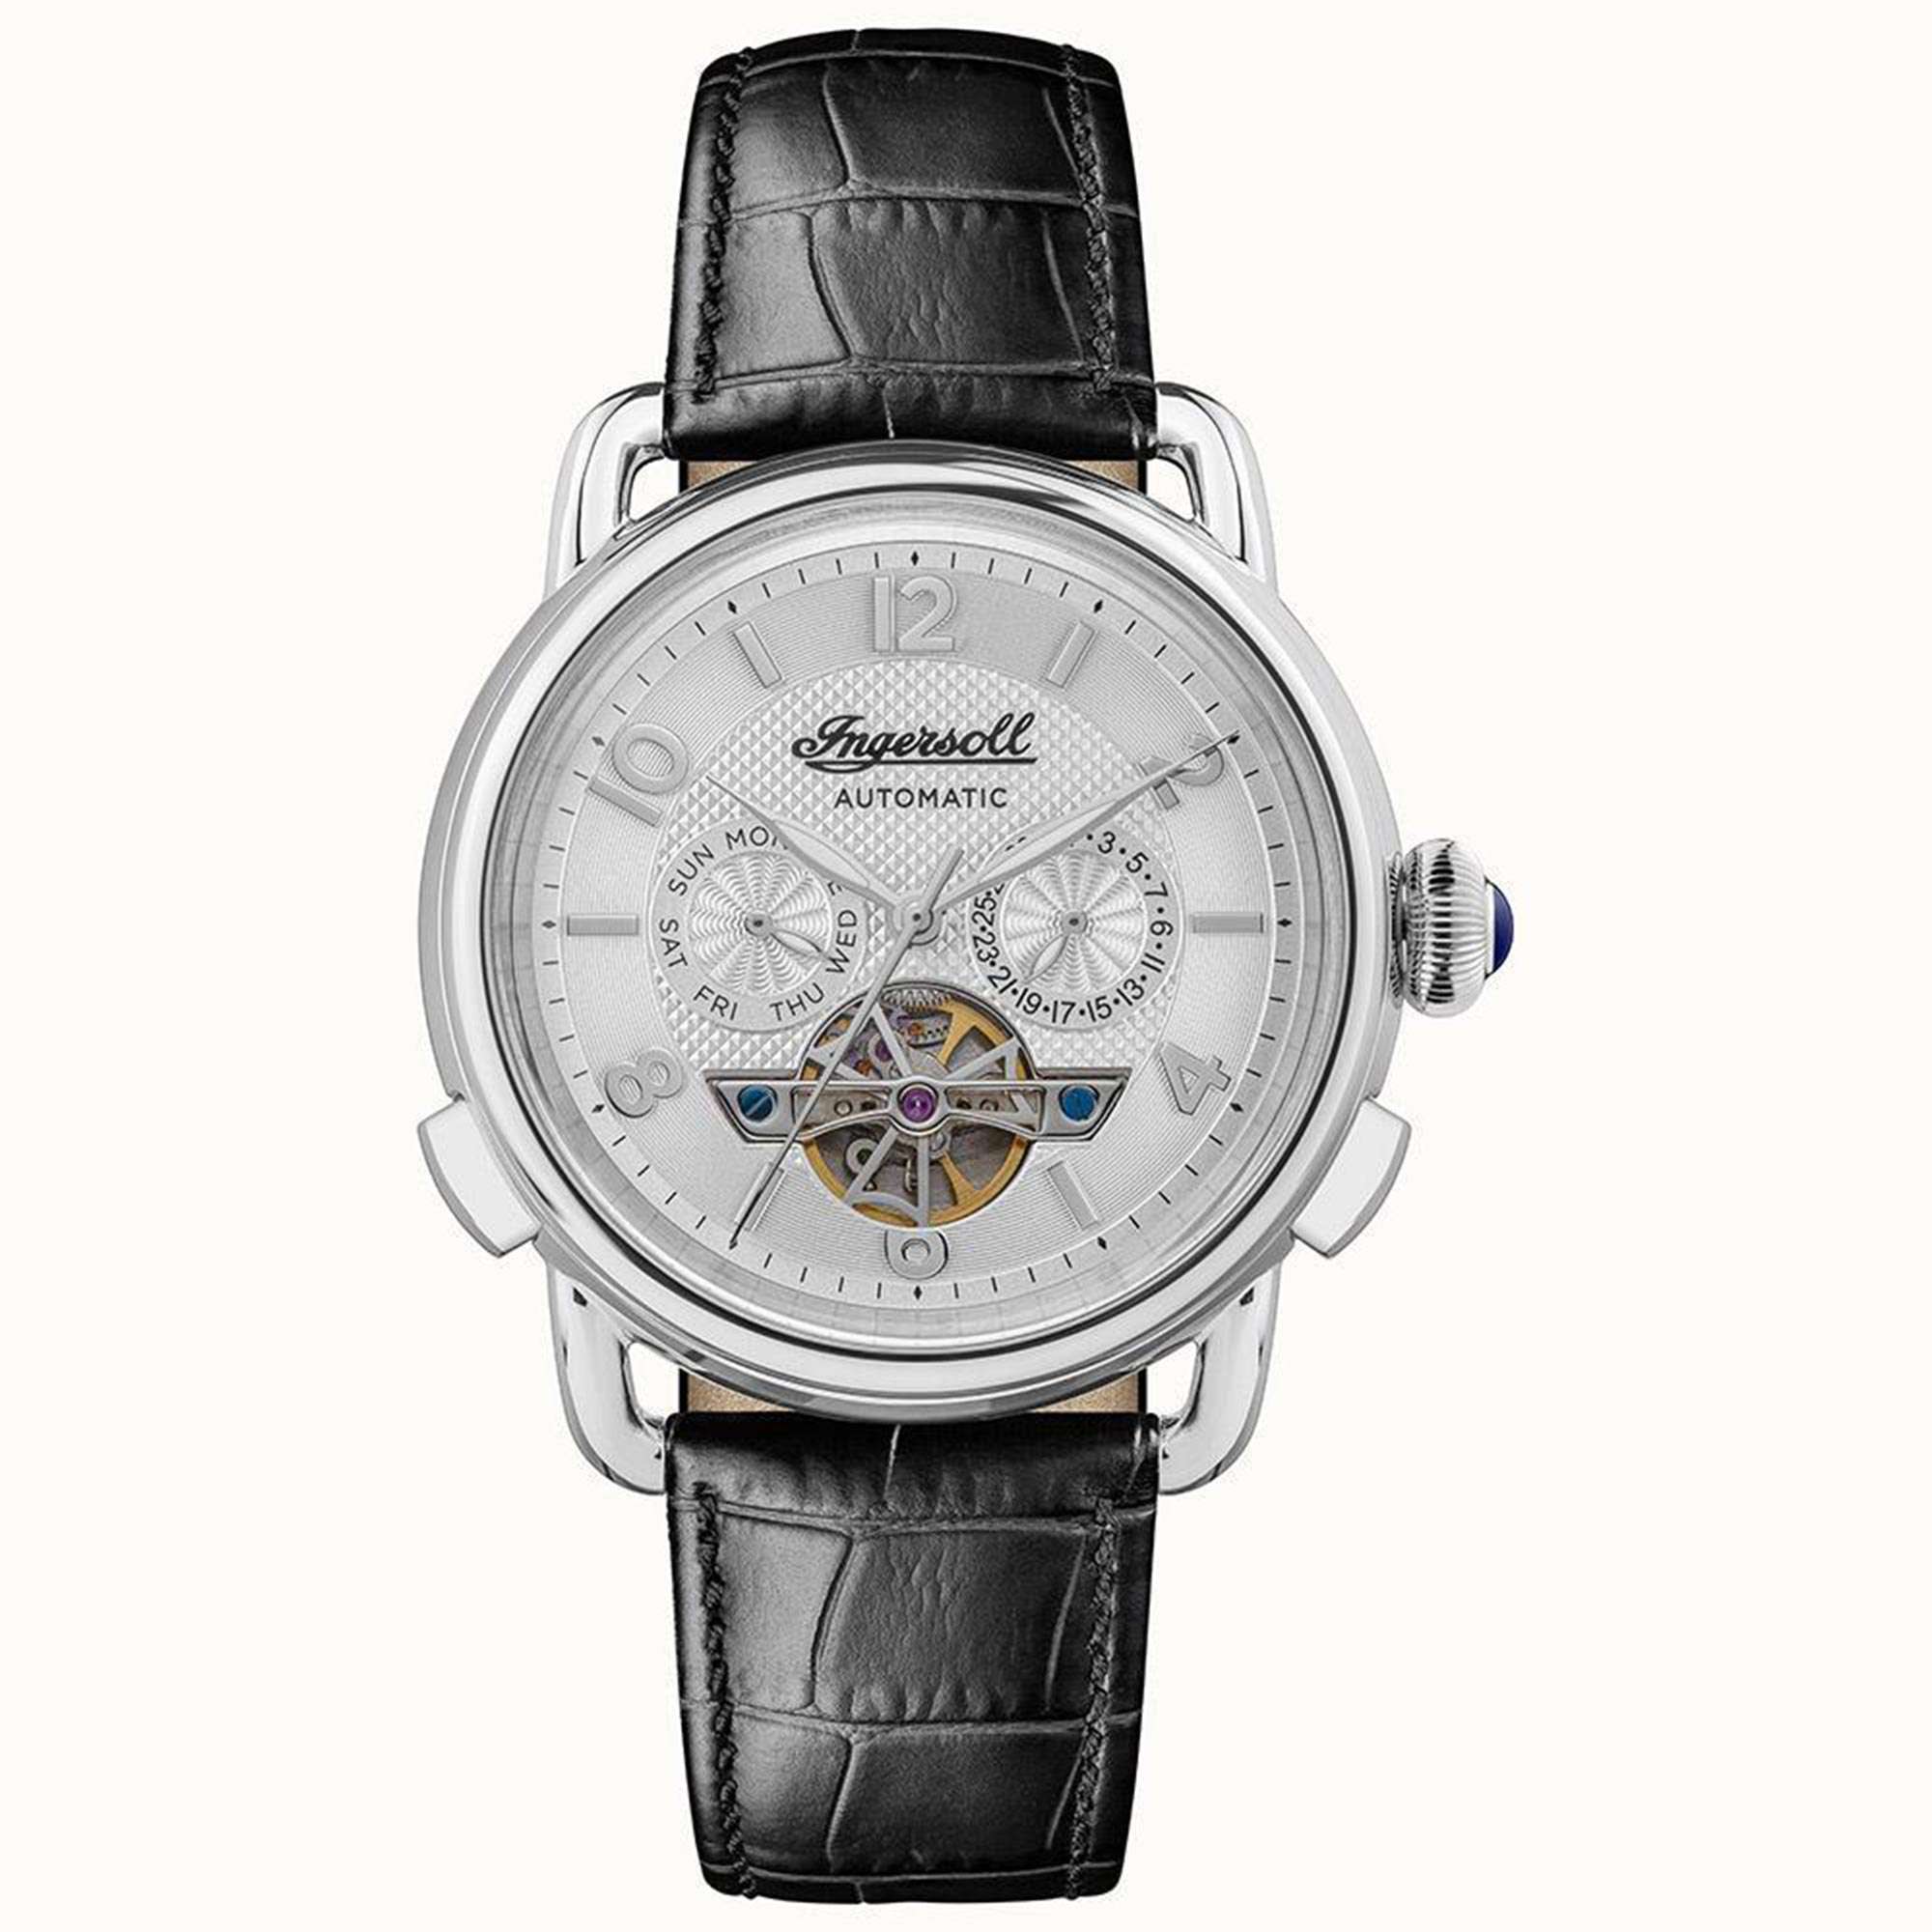 Ingersoll New England Automatic Silver Dial Black Leather Strap Mens Watch I00903b